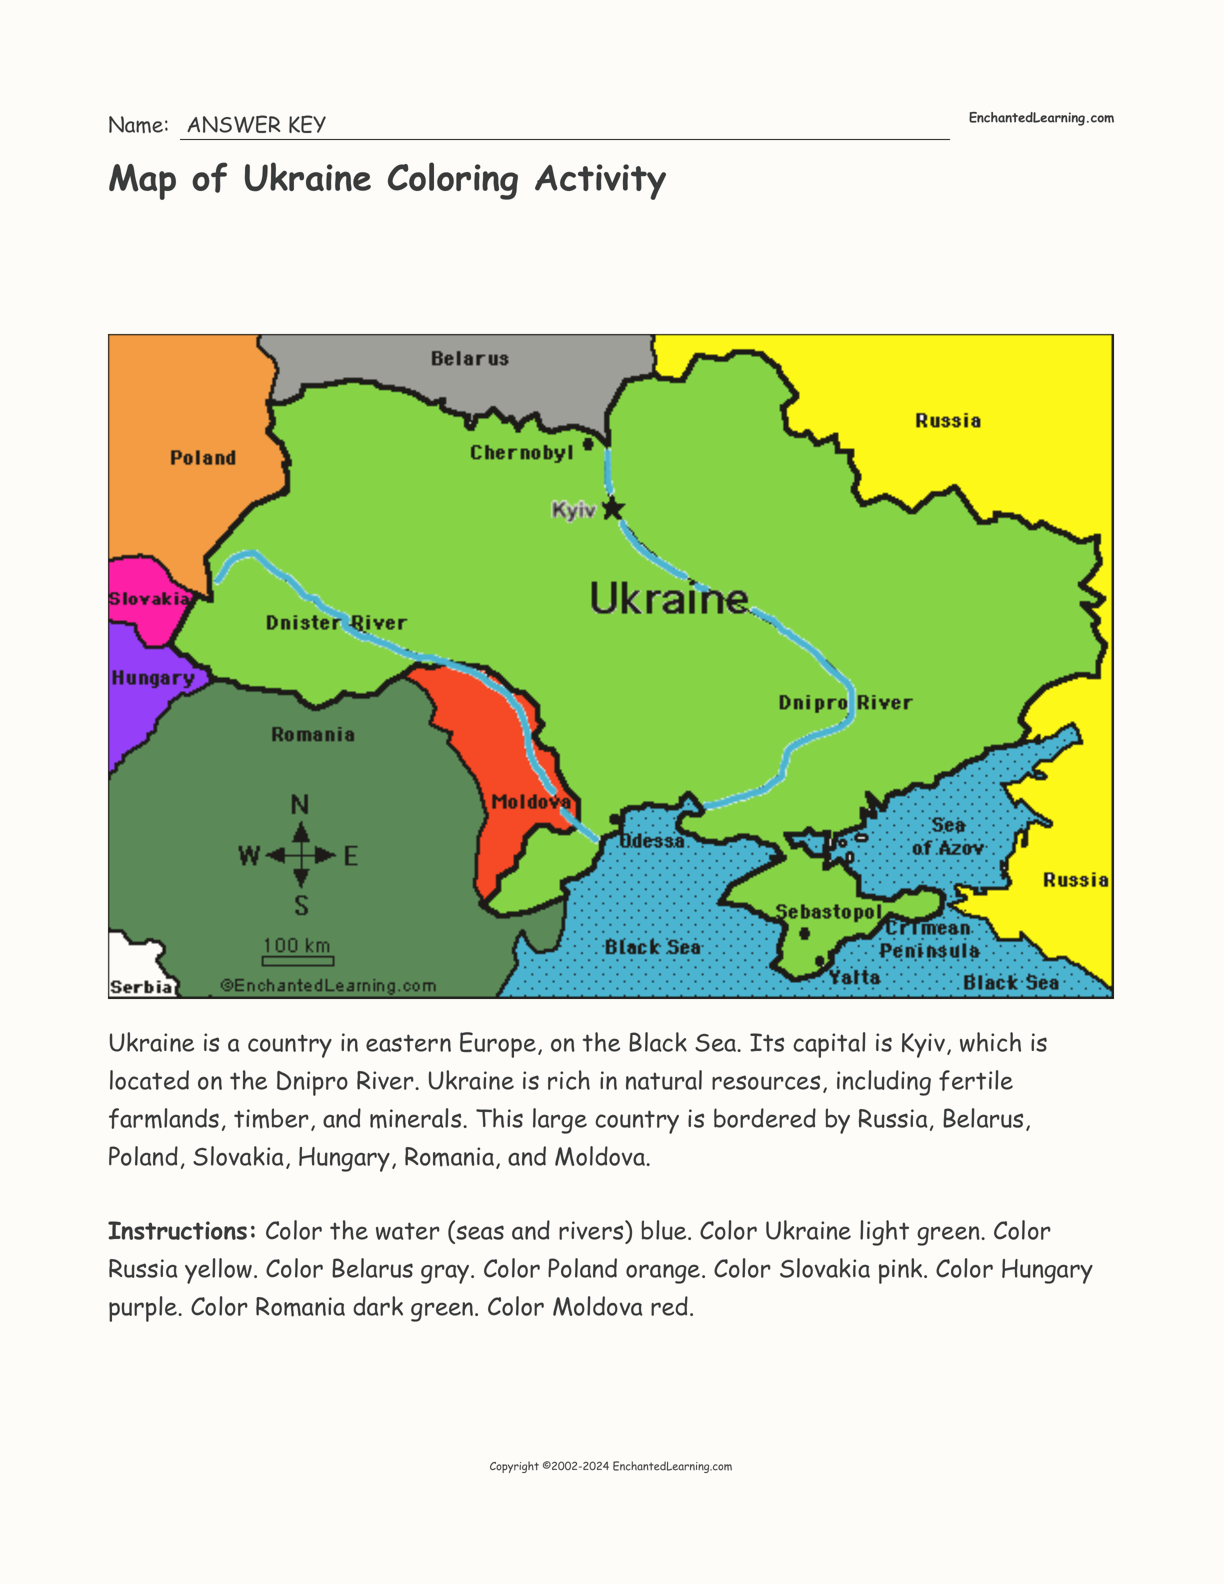 Map of Ukraine Coloring Activity interactive worksheet page 2